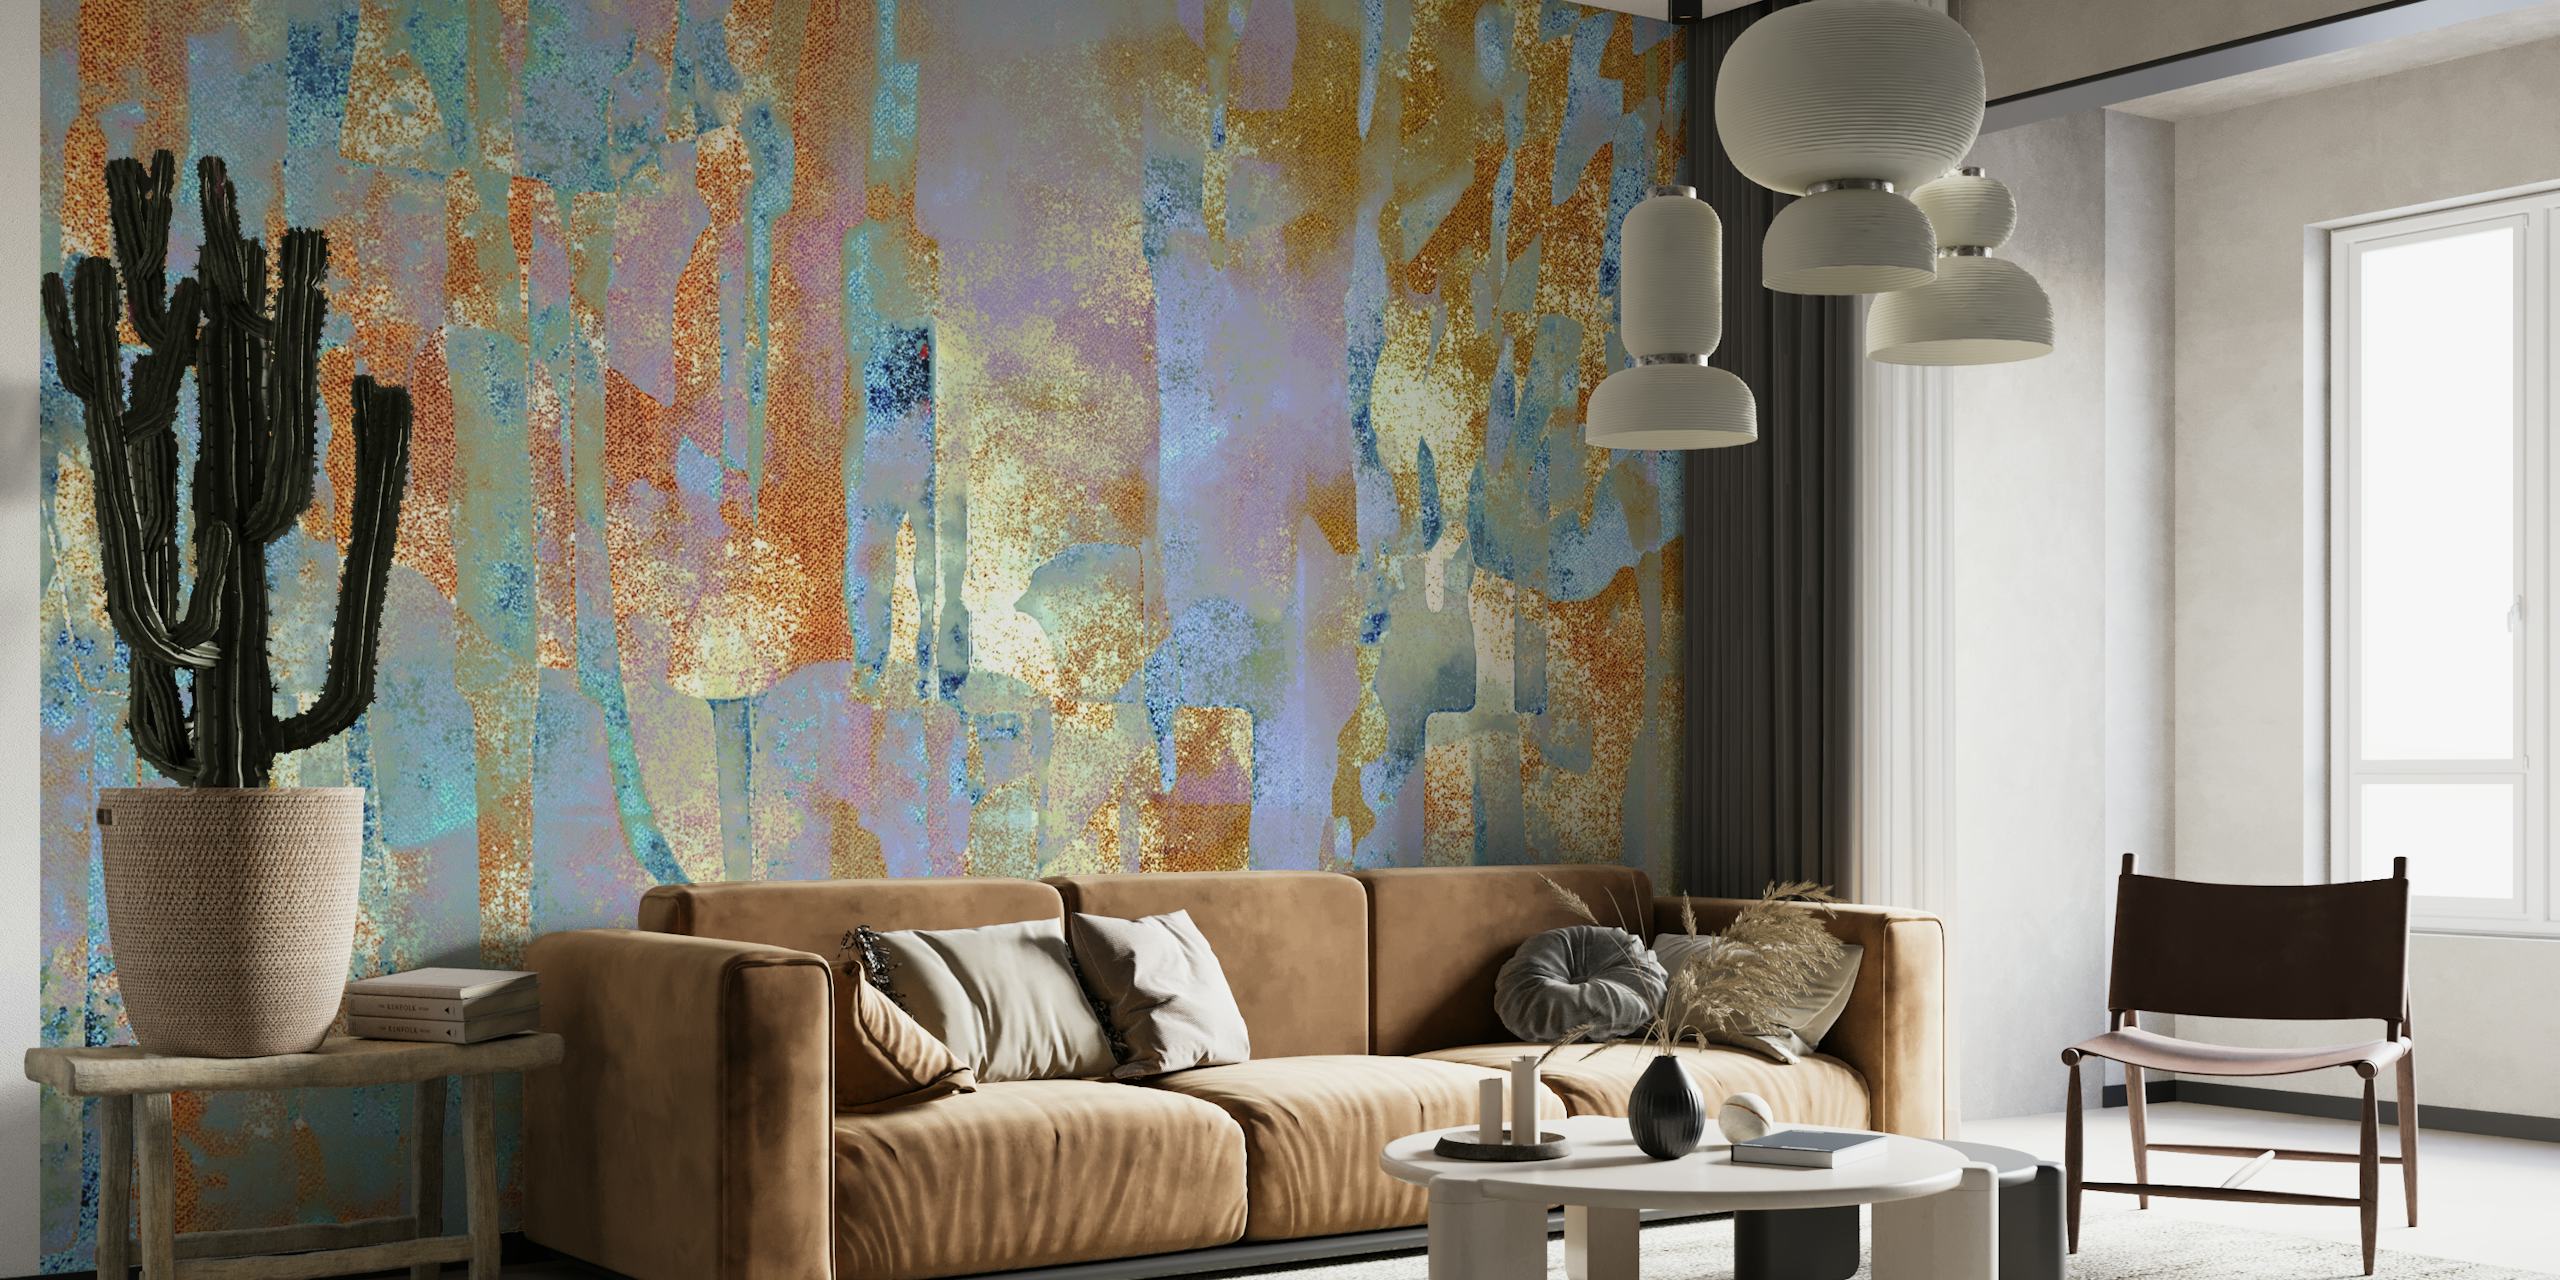 African Dye on Mud Cloth inspired wall mural with rich textures and earthy tones